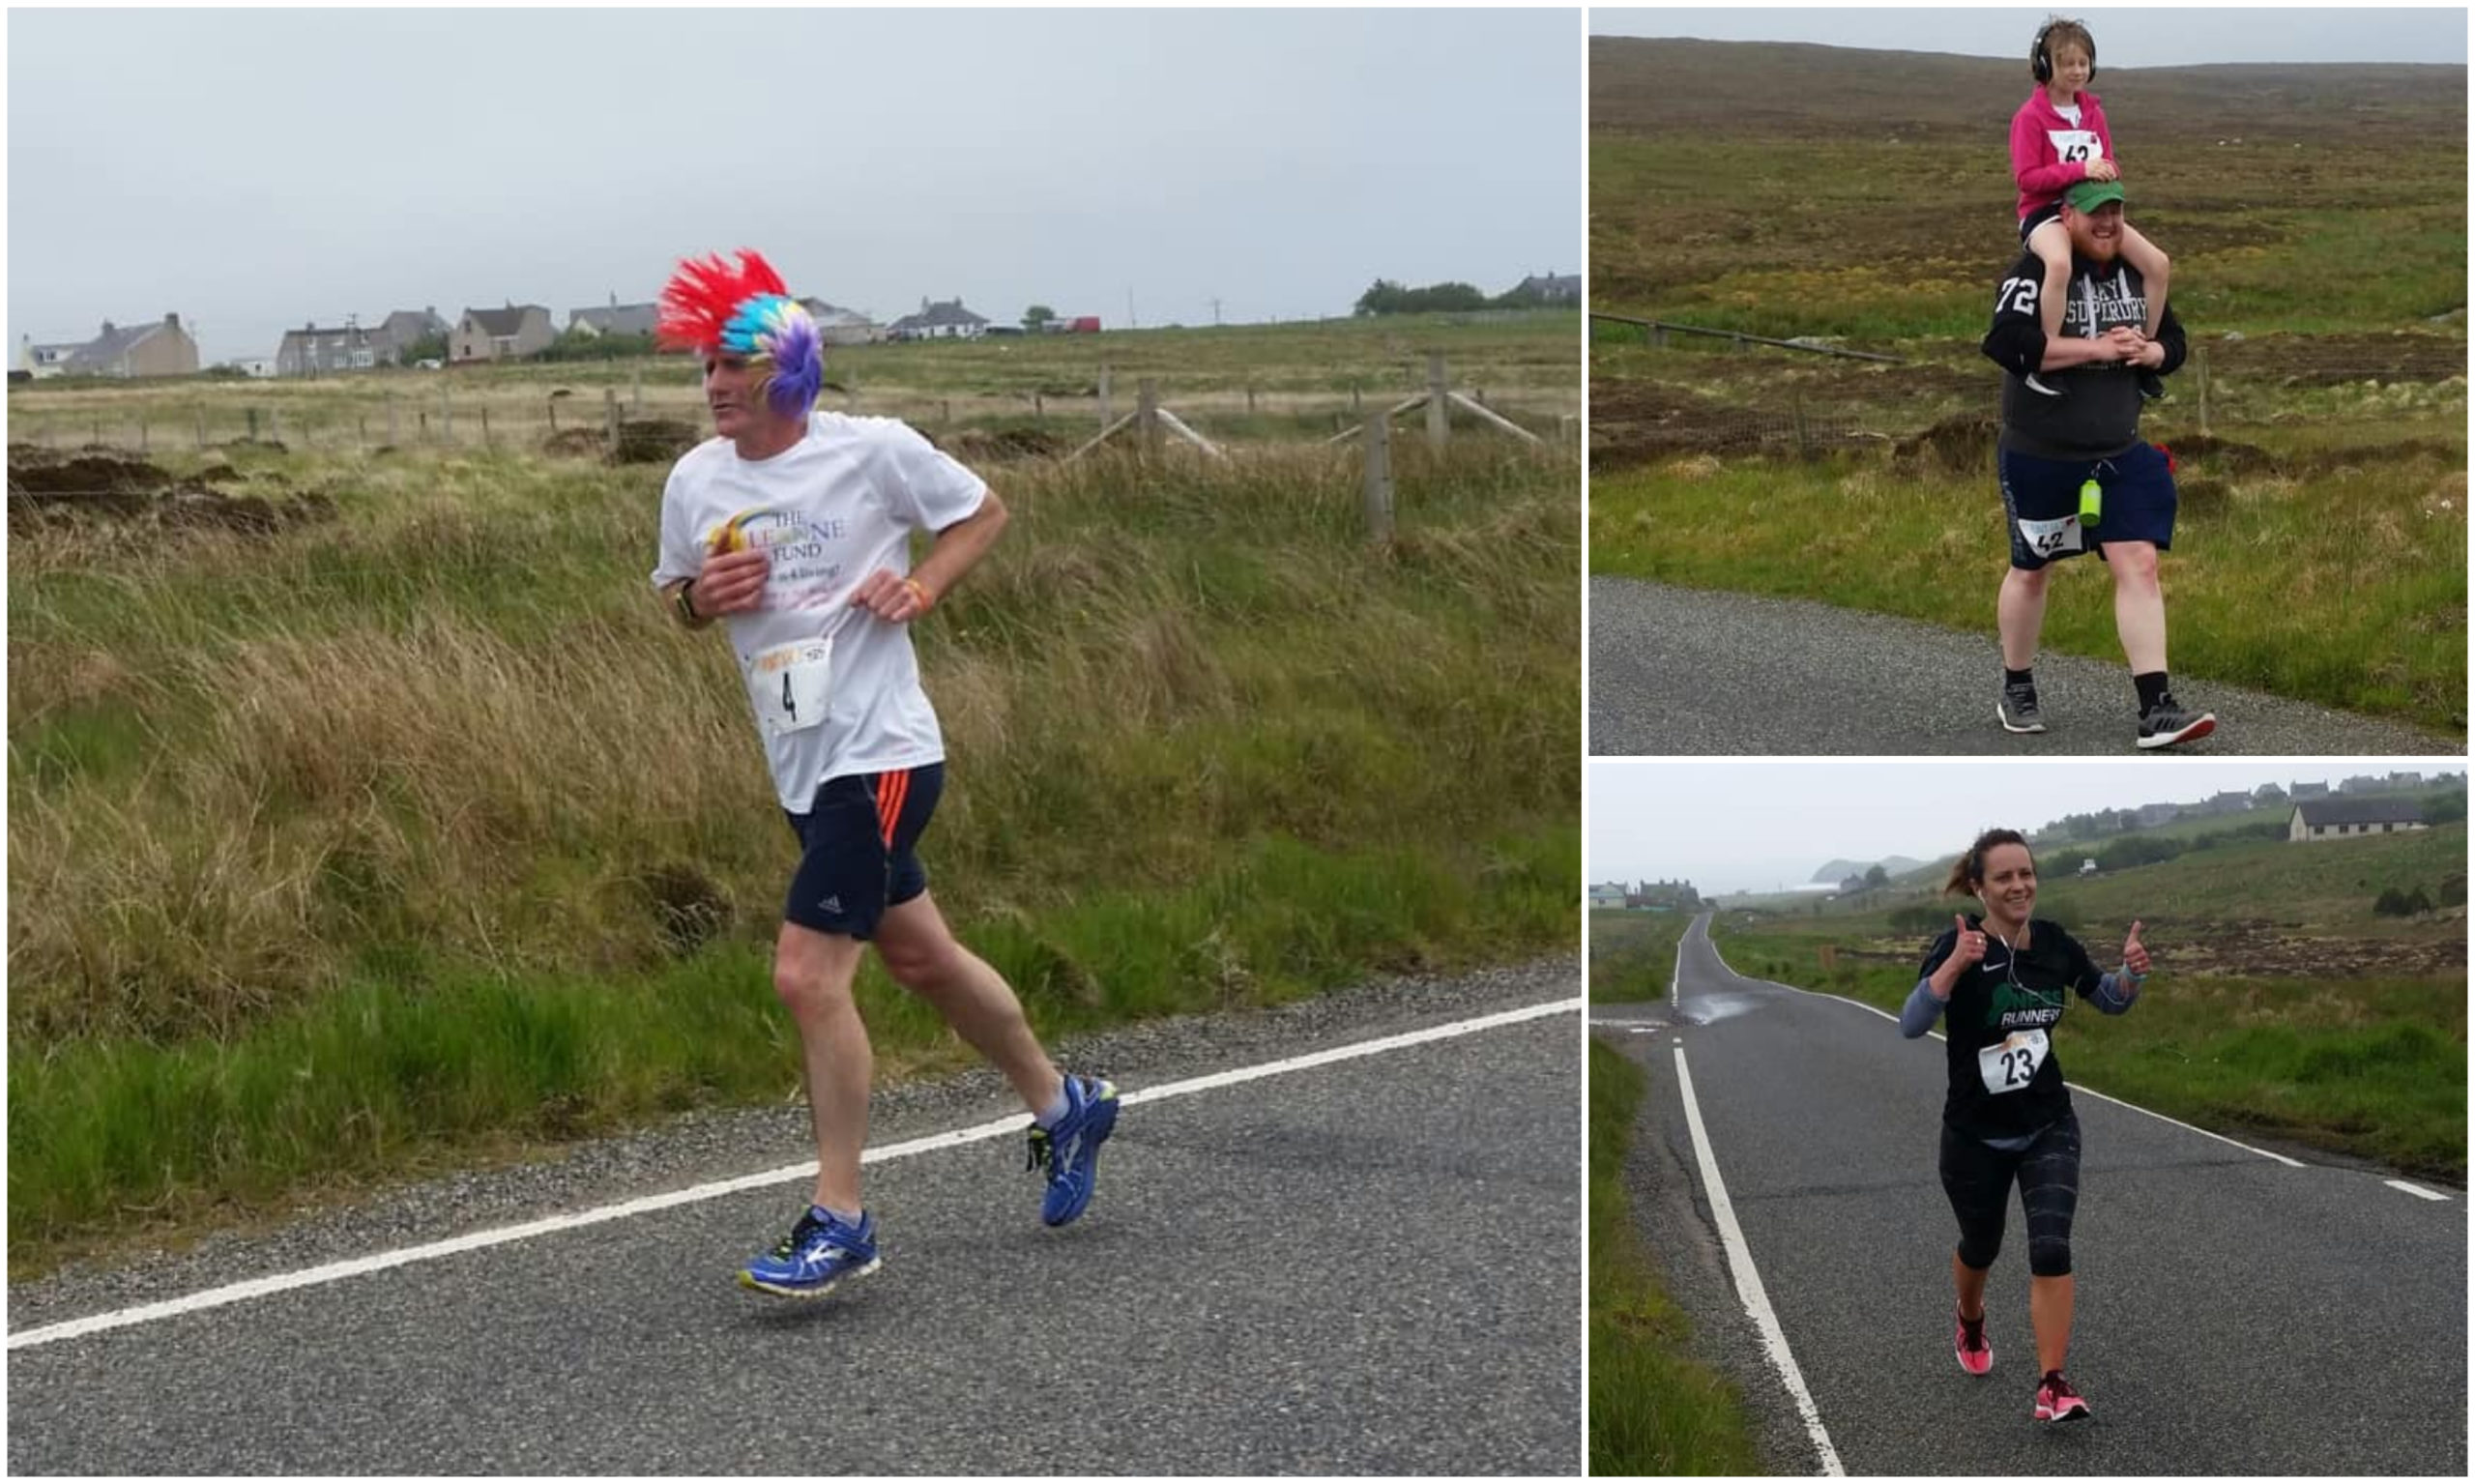 The traditional 5/10k event for The Leanne Fund has been taken online due to the Coronavirus pandemic